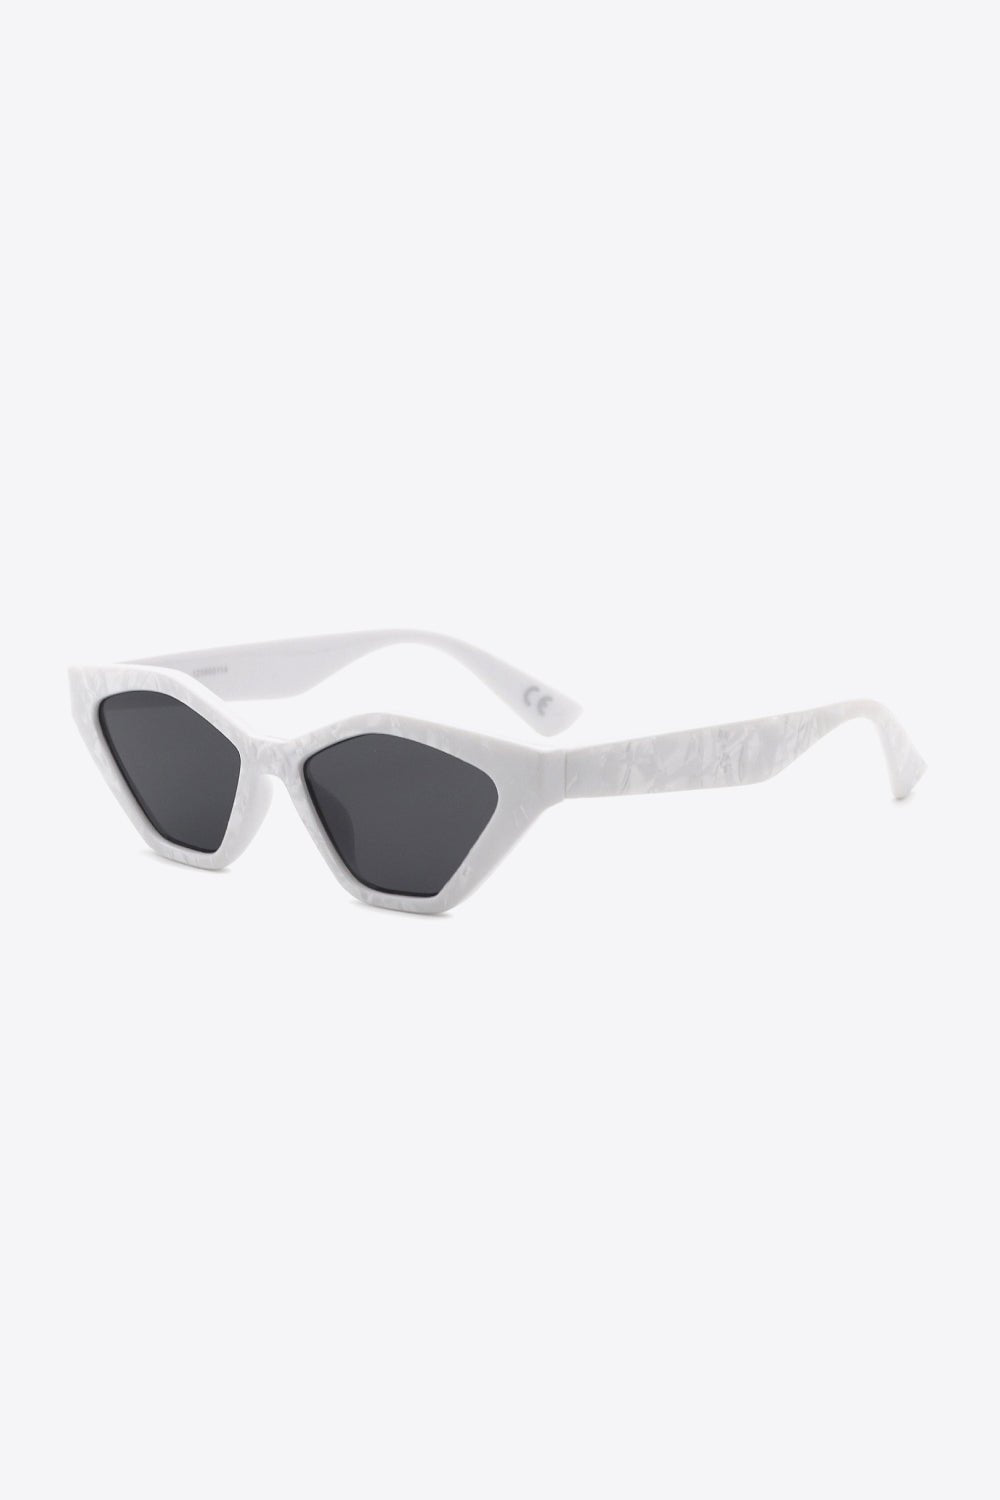 Sunglasses in Cat Eye Design with Polycarbonate Lenses